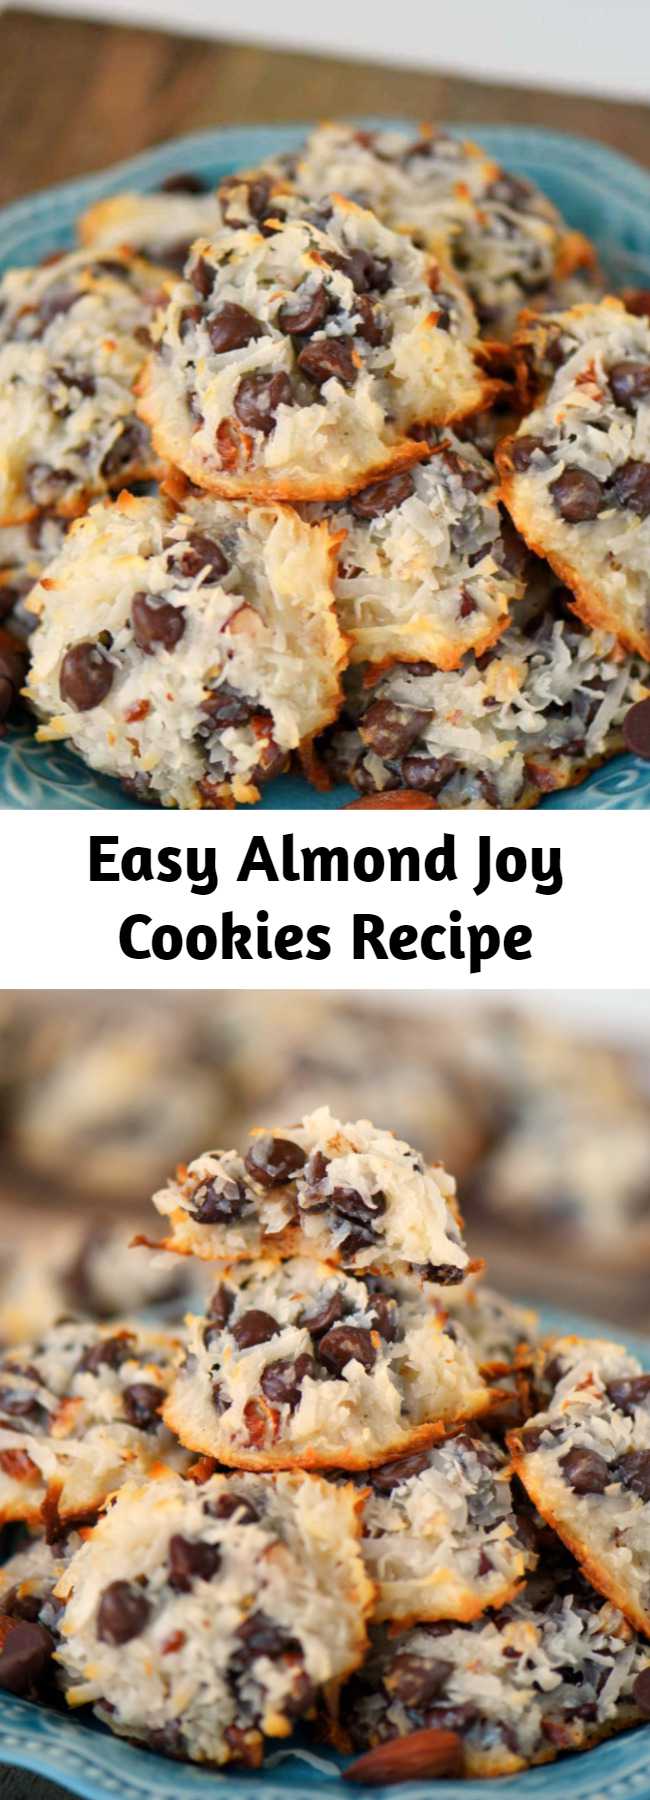 Easy Almond Joy Cookies Recipe - These easy Almond Joy Cookies take just four ingredients and don't even require a mixer! No beating, no chilling, just mix 'em up and throw 'em in the oven EASY! You're going to love these ooey gooey fabulous cookies!